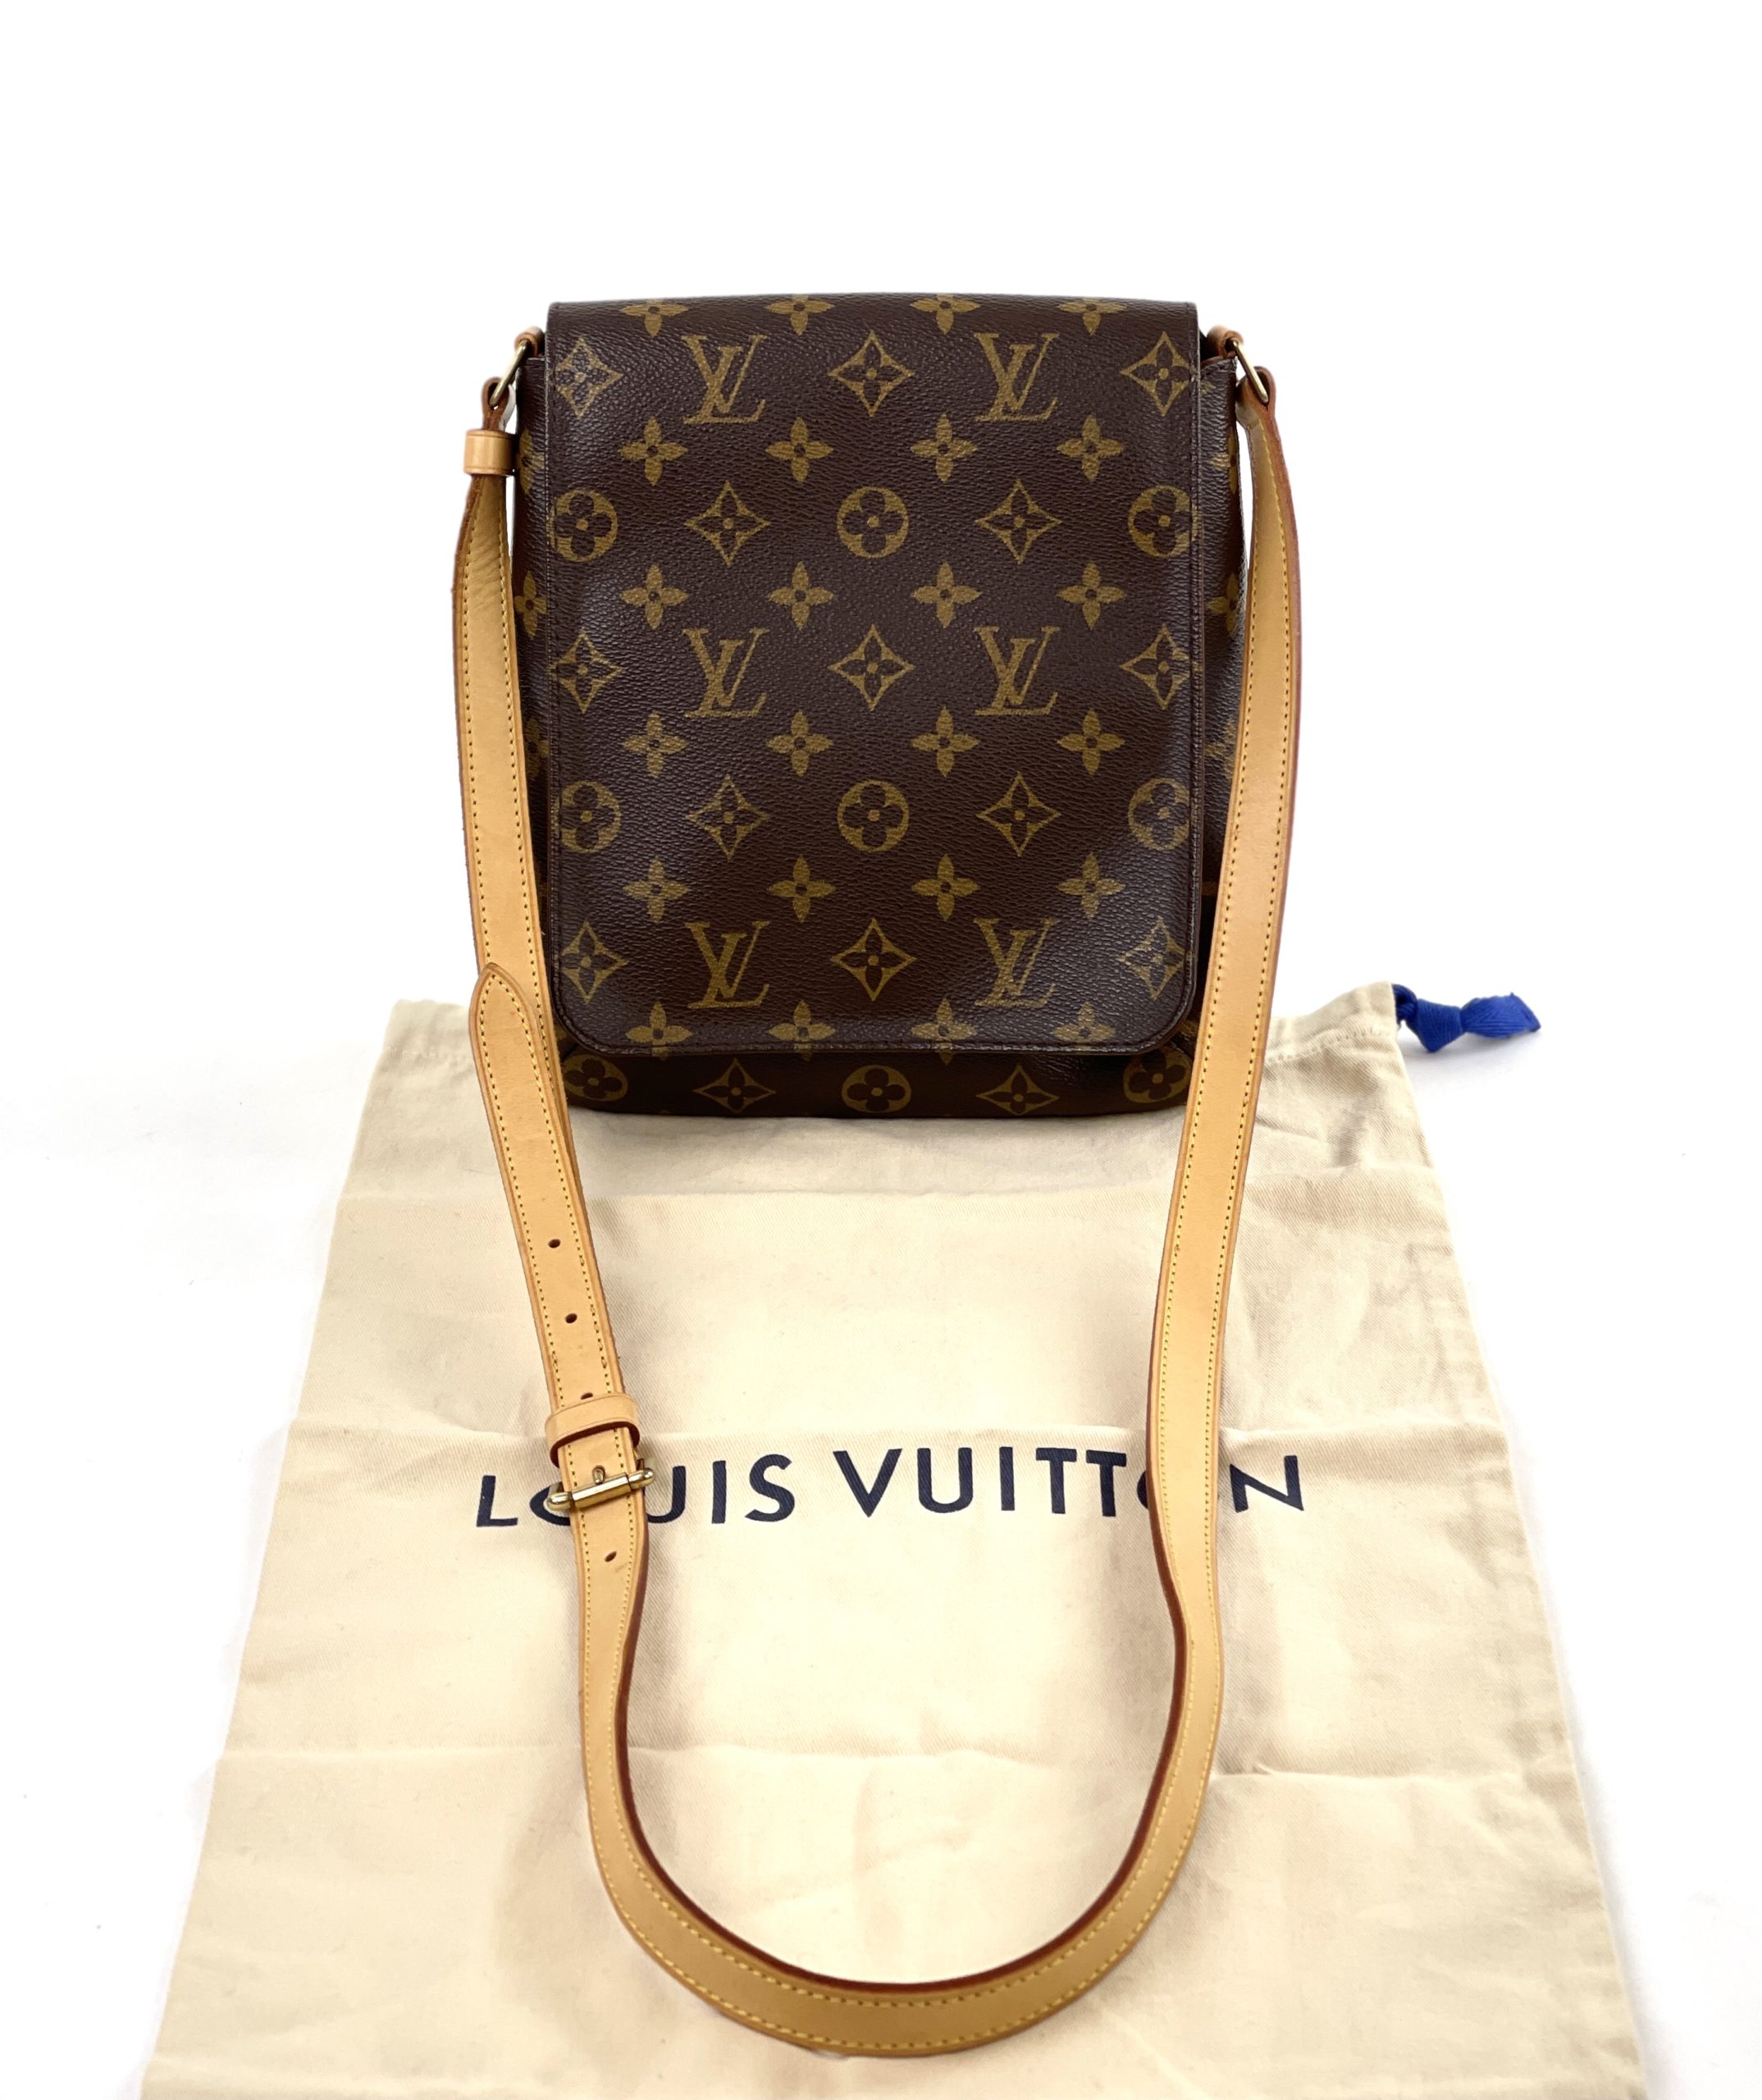 Please help authenticate this Musette Salsa Pm : r/Louisvuitton